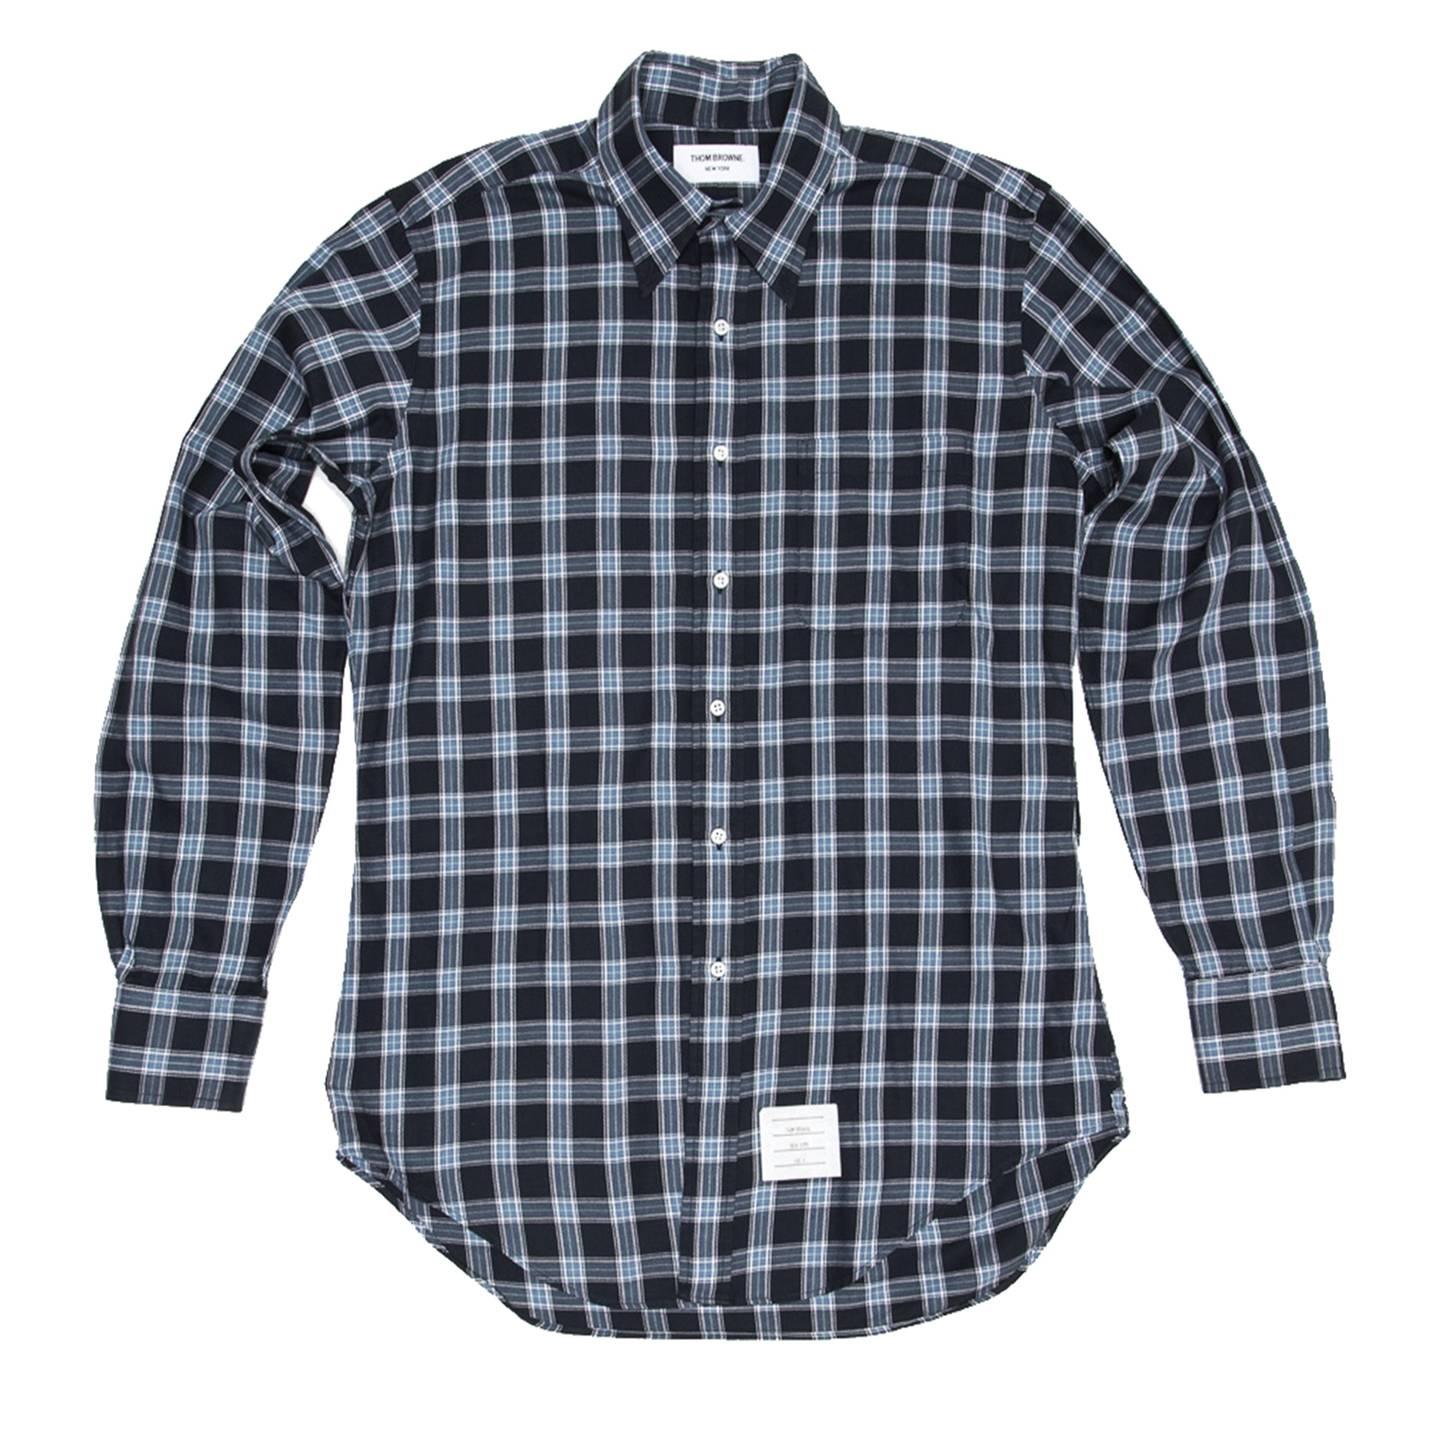 Thom Browne navy blue, baby blue and white plaid cotton flannel shirt with button down collar, white mother-of-pearl buttons and a patch pocket at bust. Made for Man. Made in U.S.A.

Size  4

Condition  Excellent: never worn